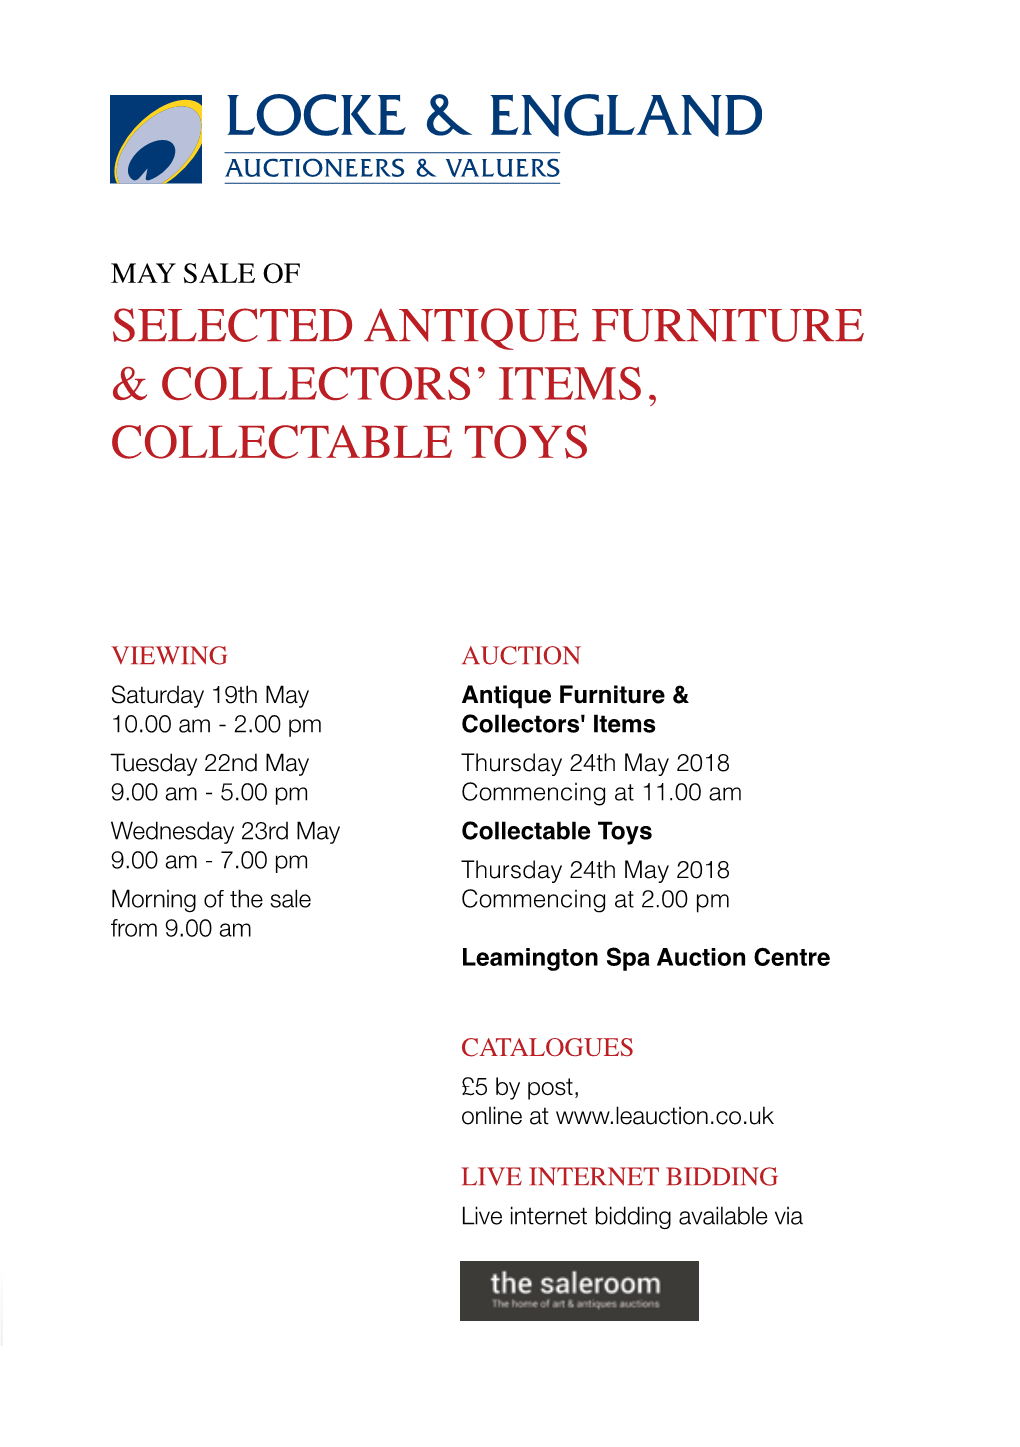 Selected Antique Furniture & Collectors' Items